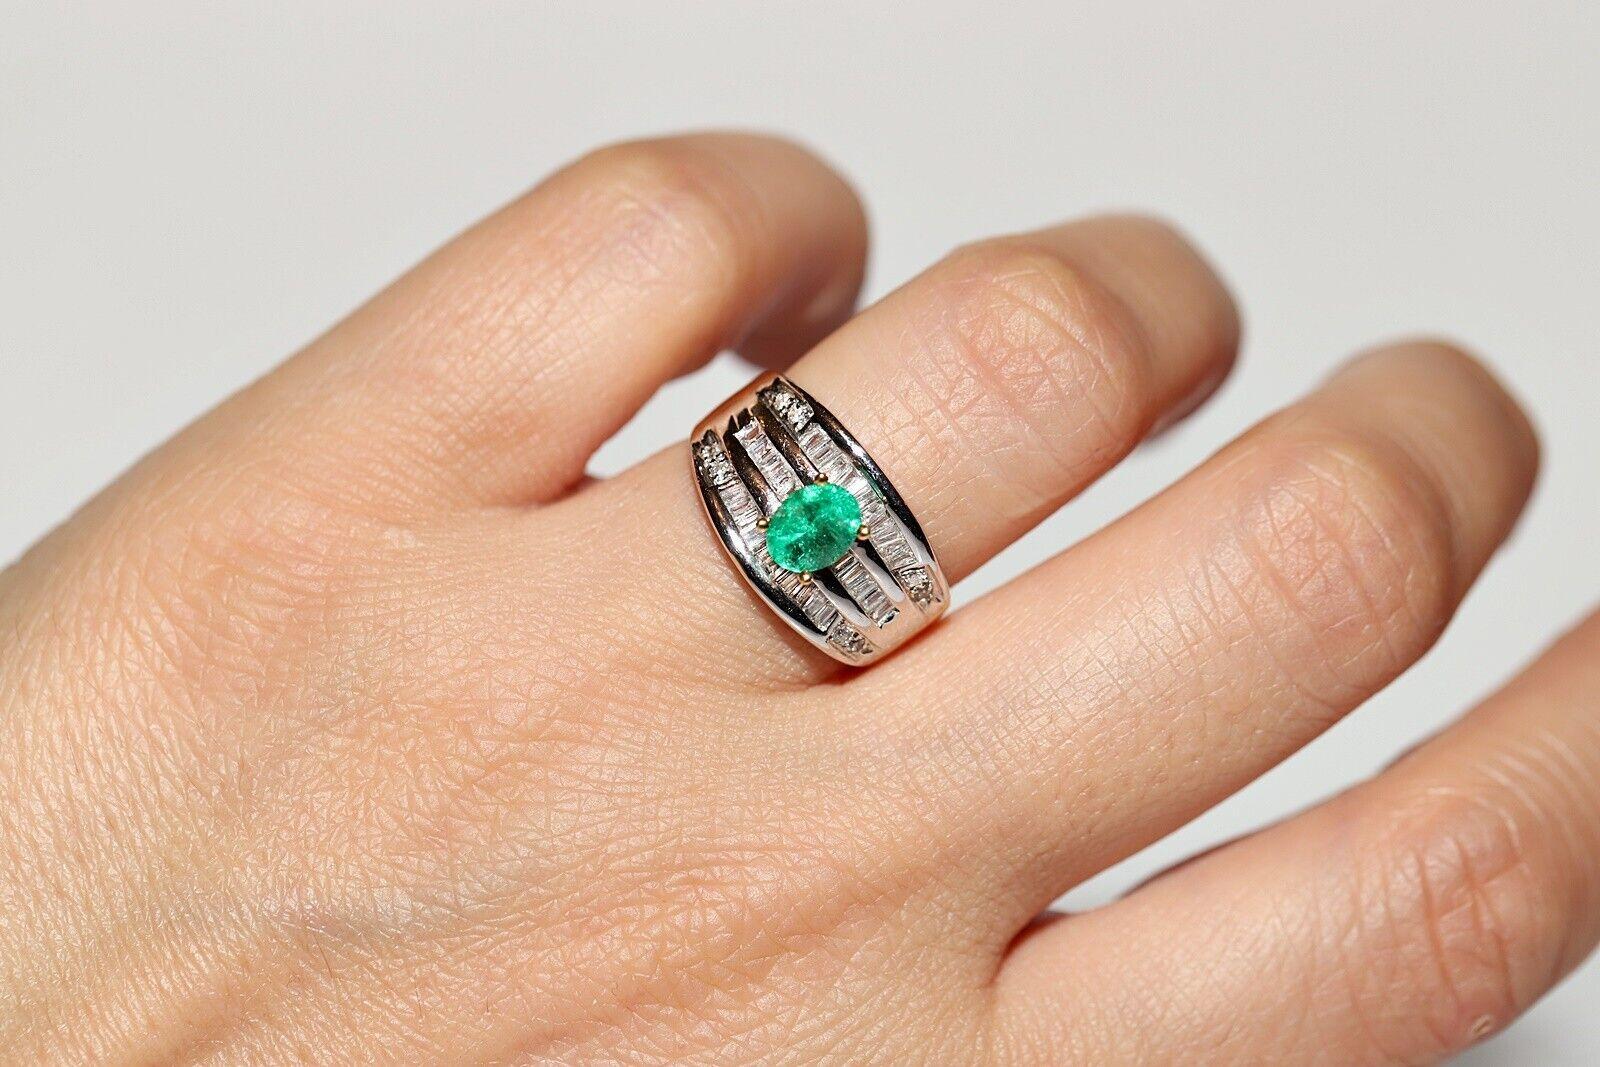 Vintage Circa 1980s 18k Gold Natural Baguette Cut Diamond And Emerald Ring For Sale 1